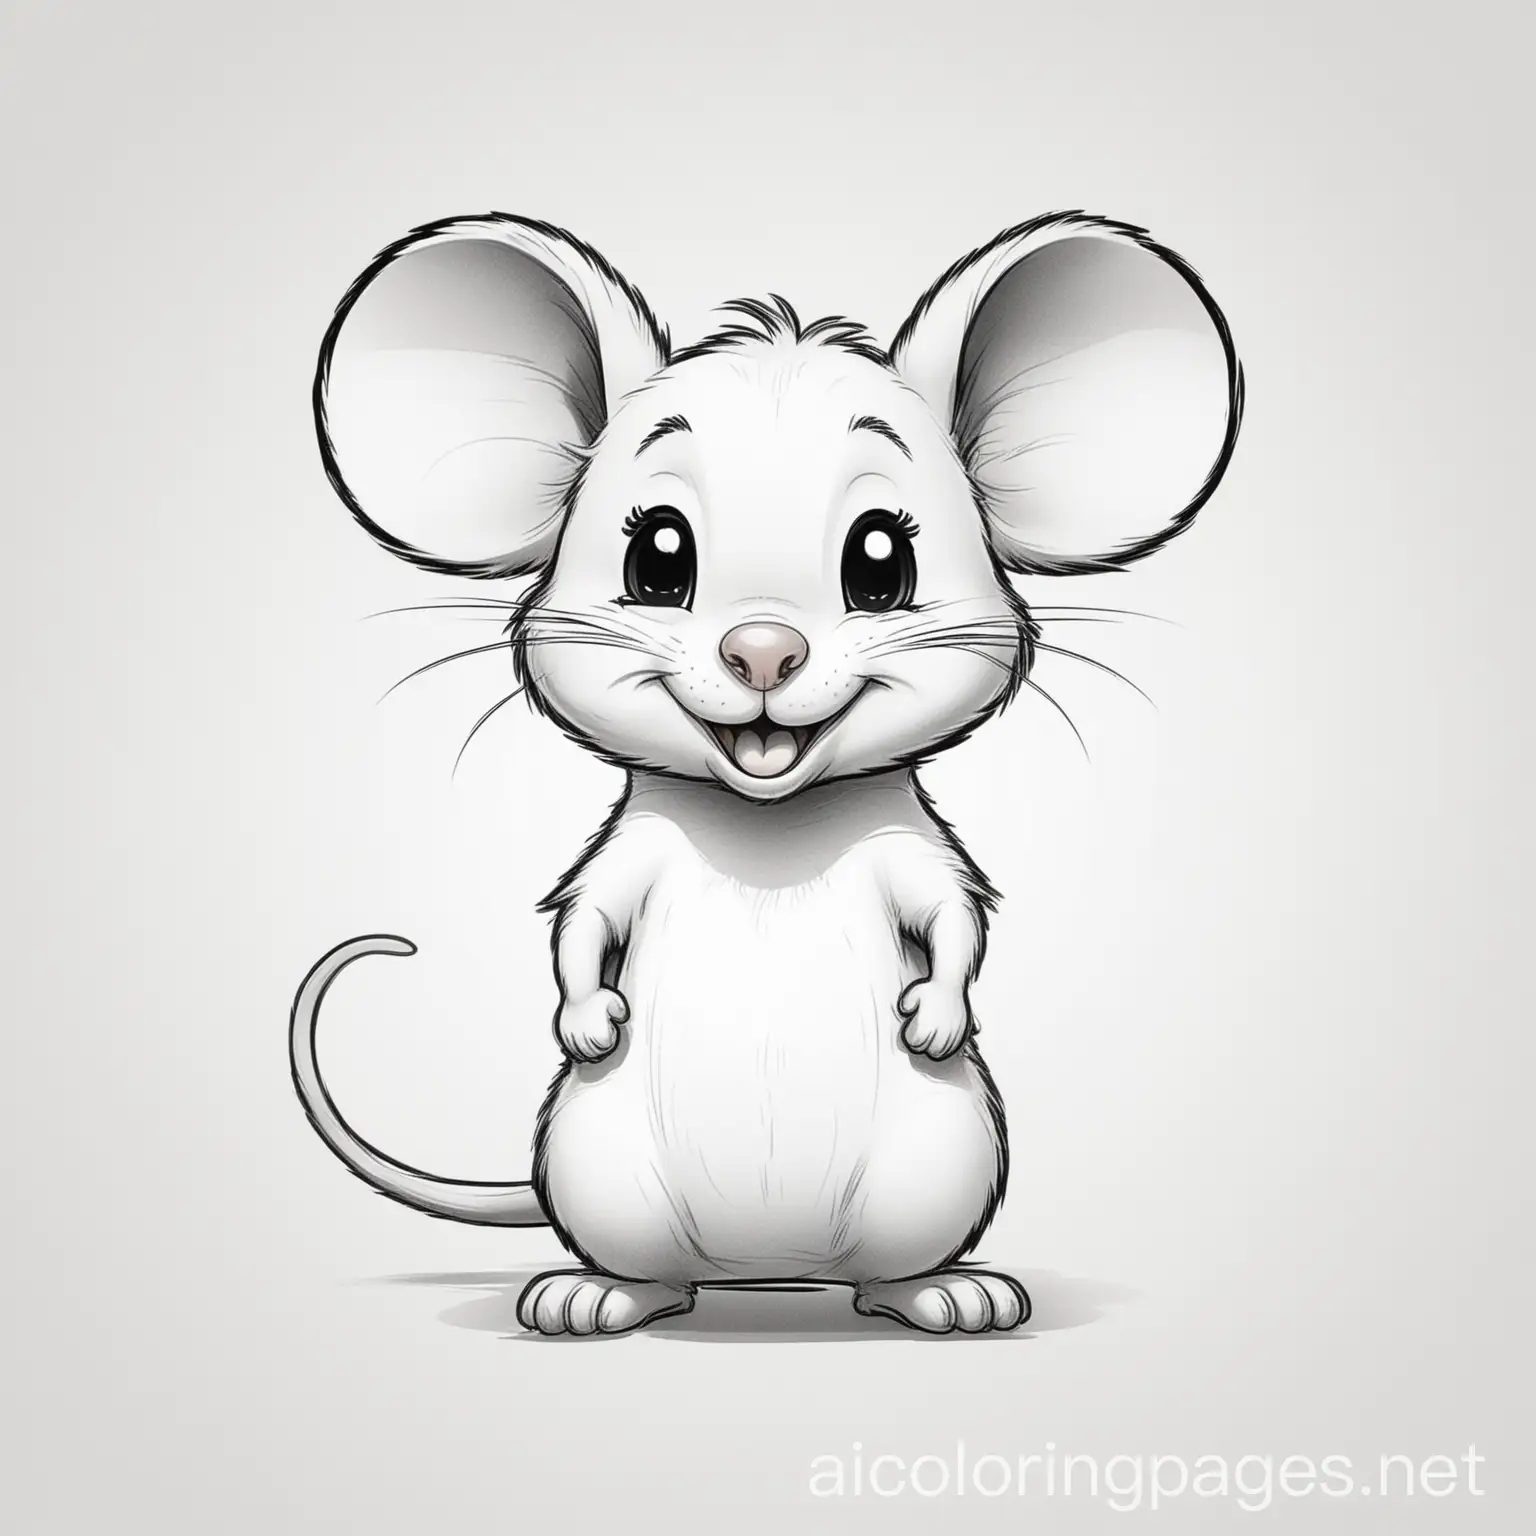 Cheerful-Cartoon-Mouse-Coloring-Page-with-Ample-White-Space